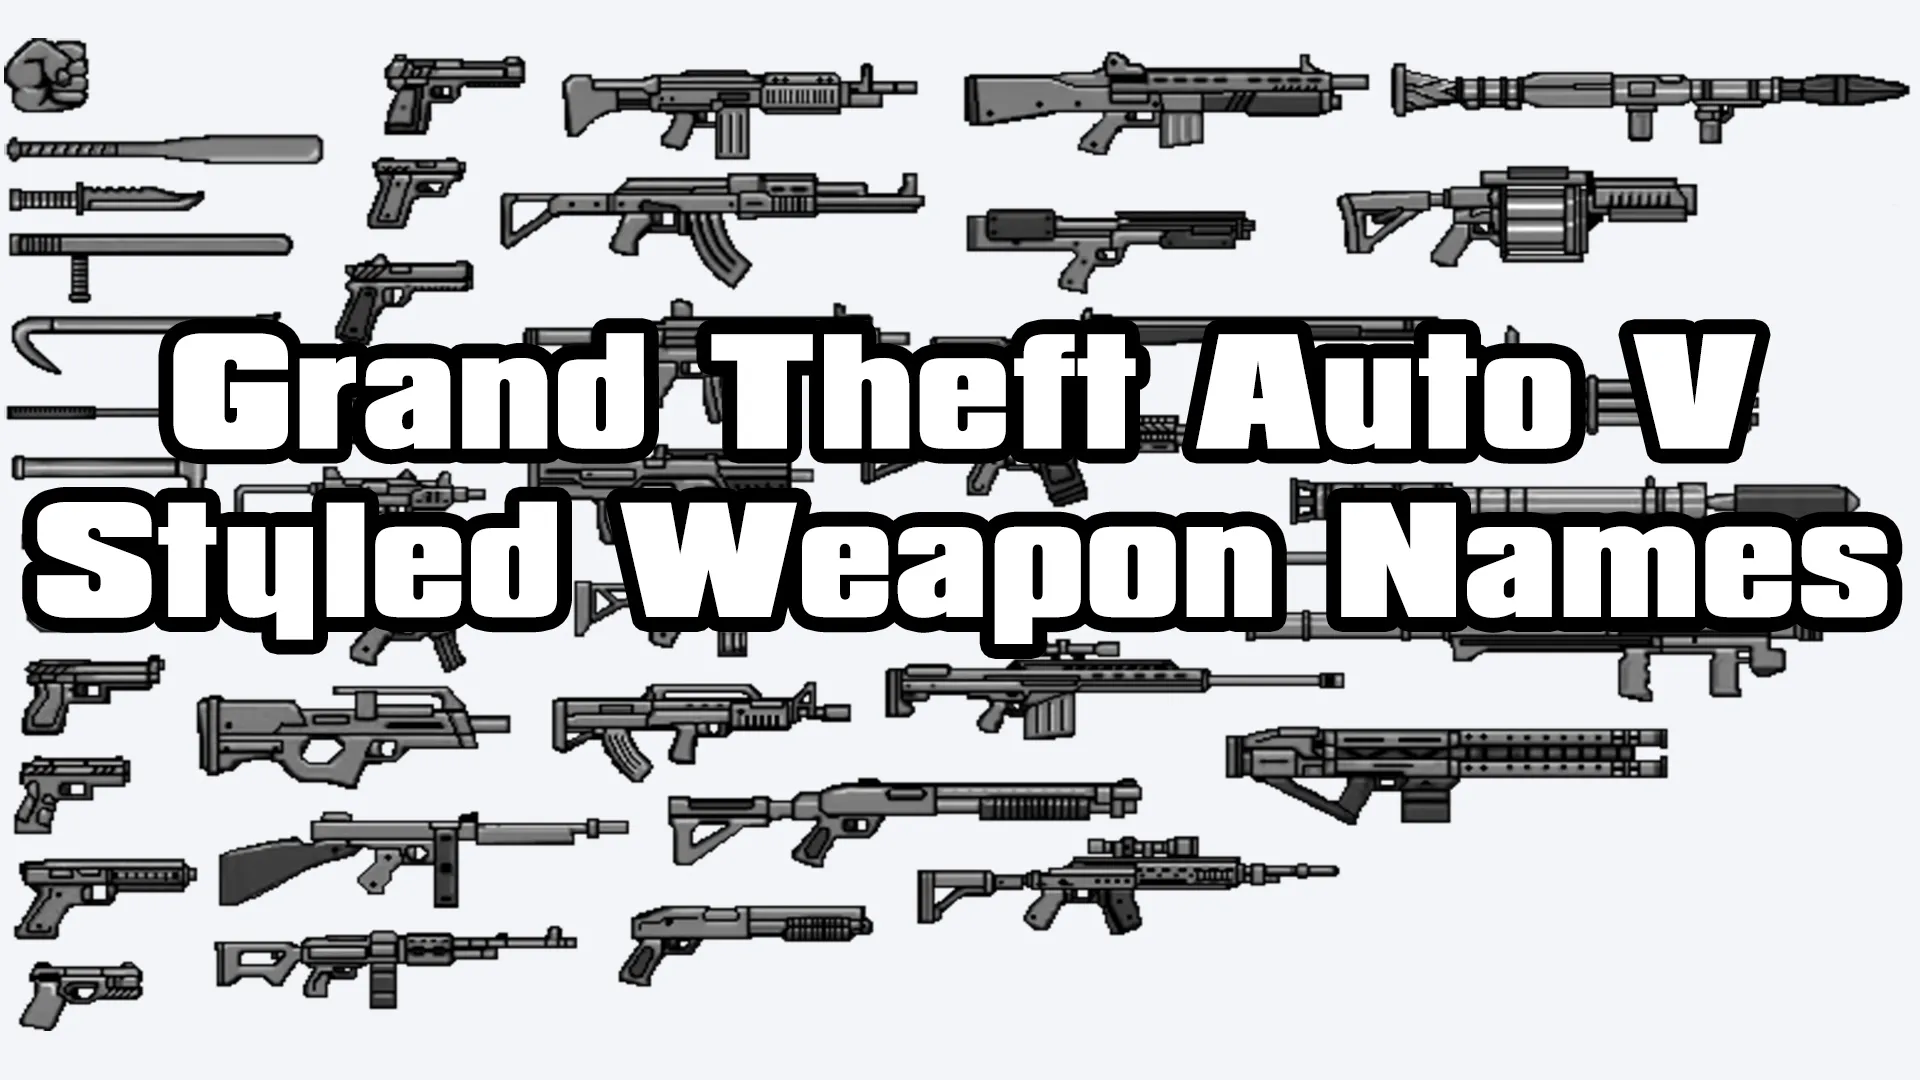 Grand Theft Auto V Styled Weapon Names - ModWorkshop